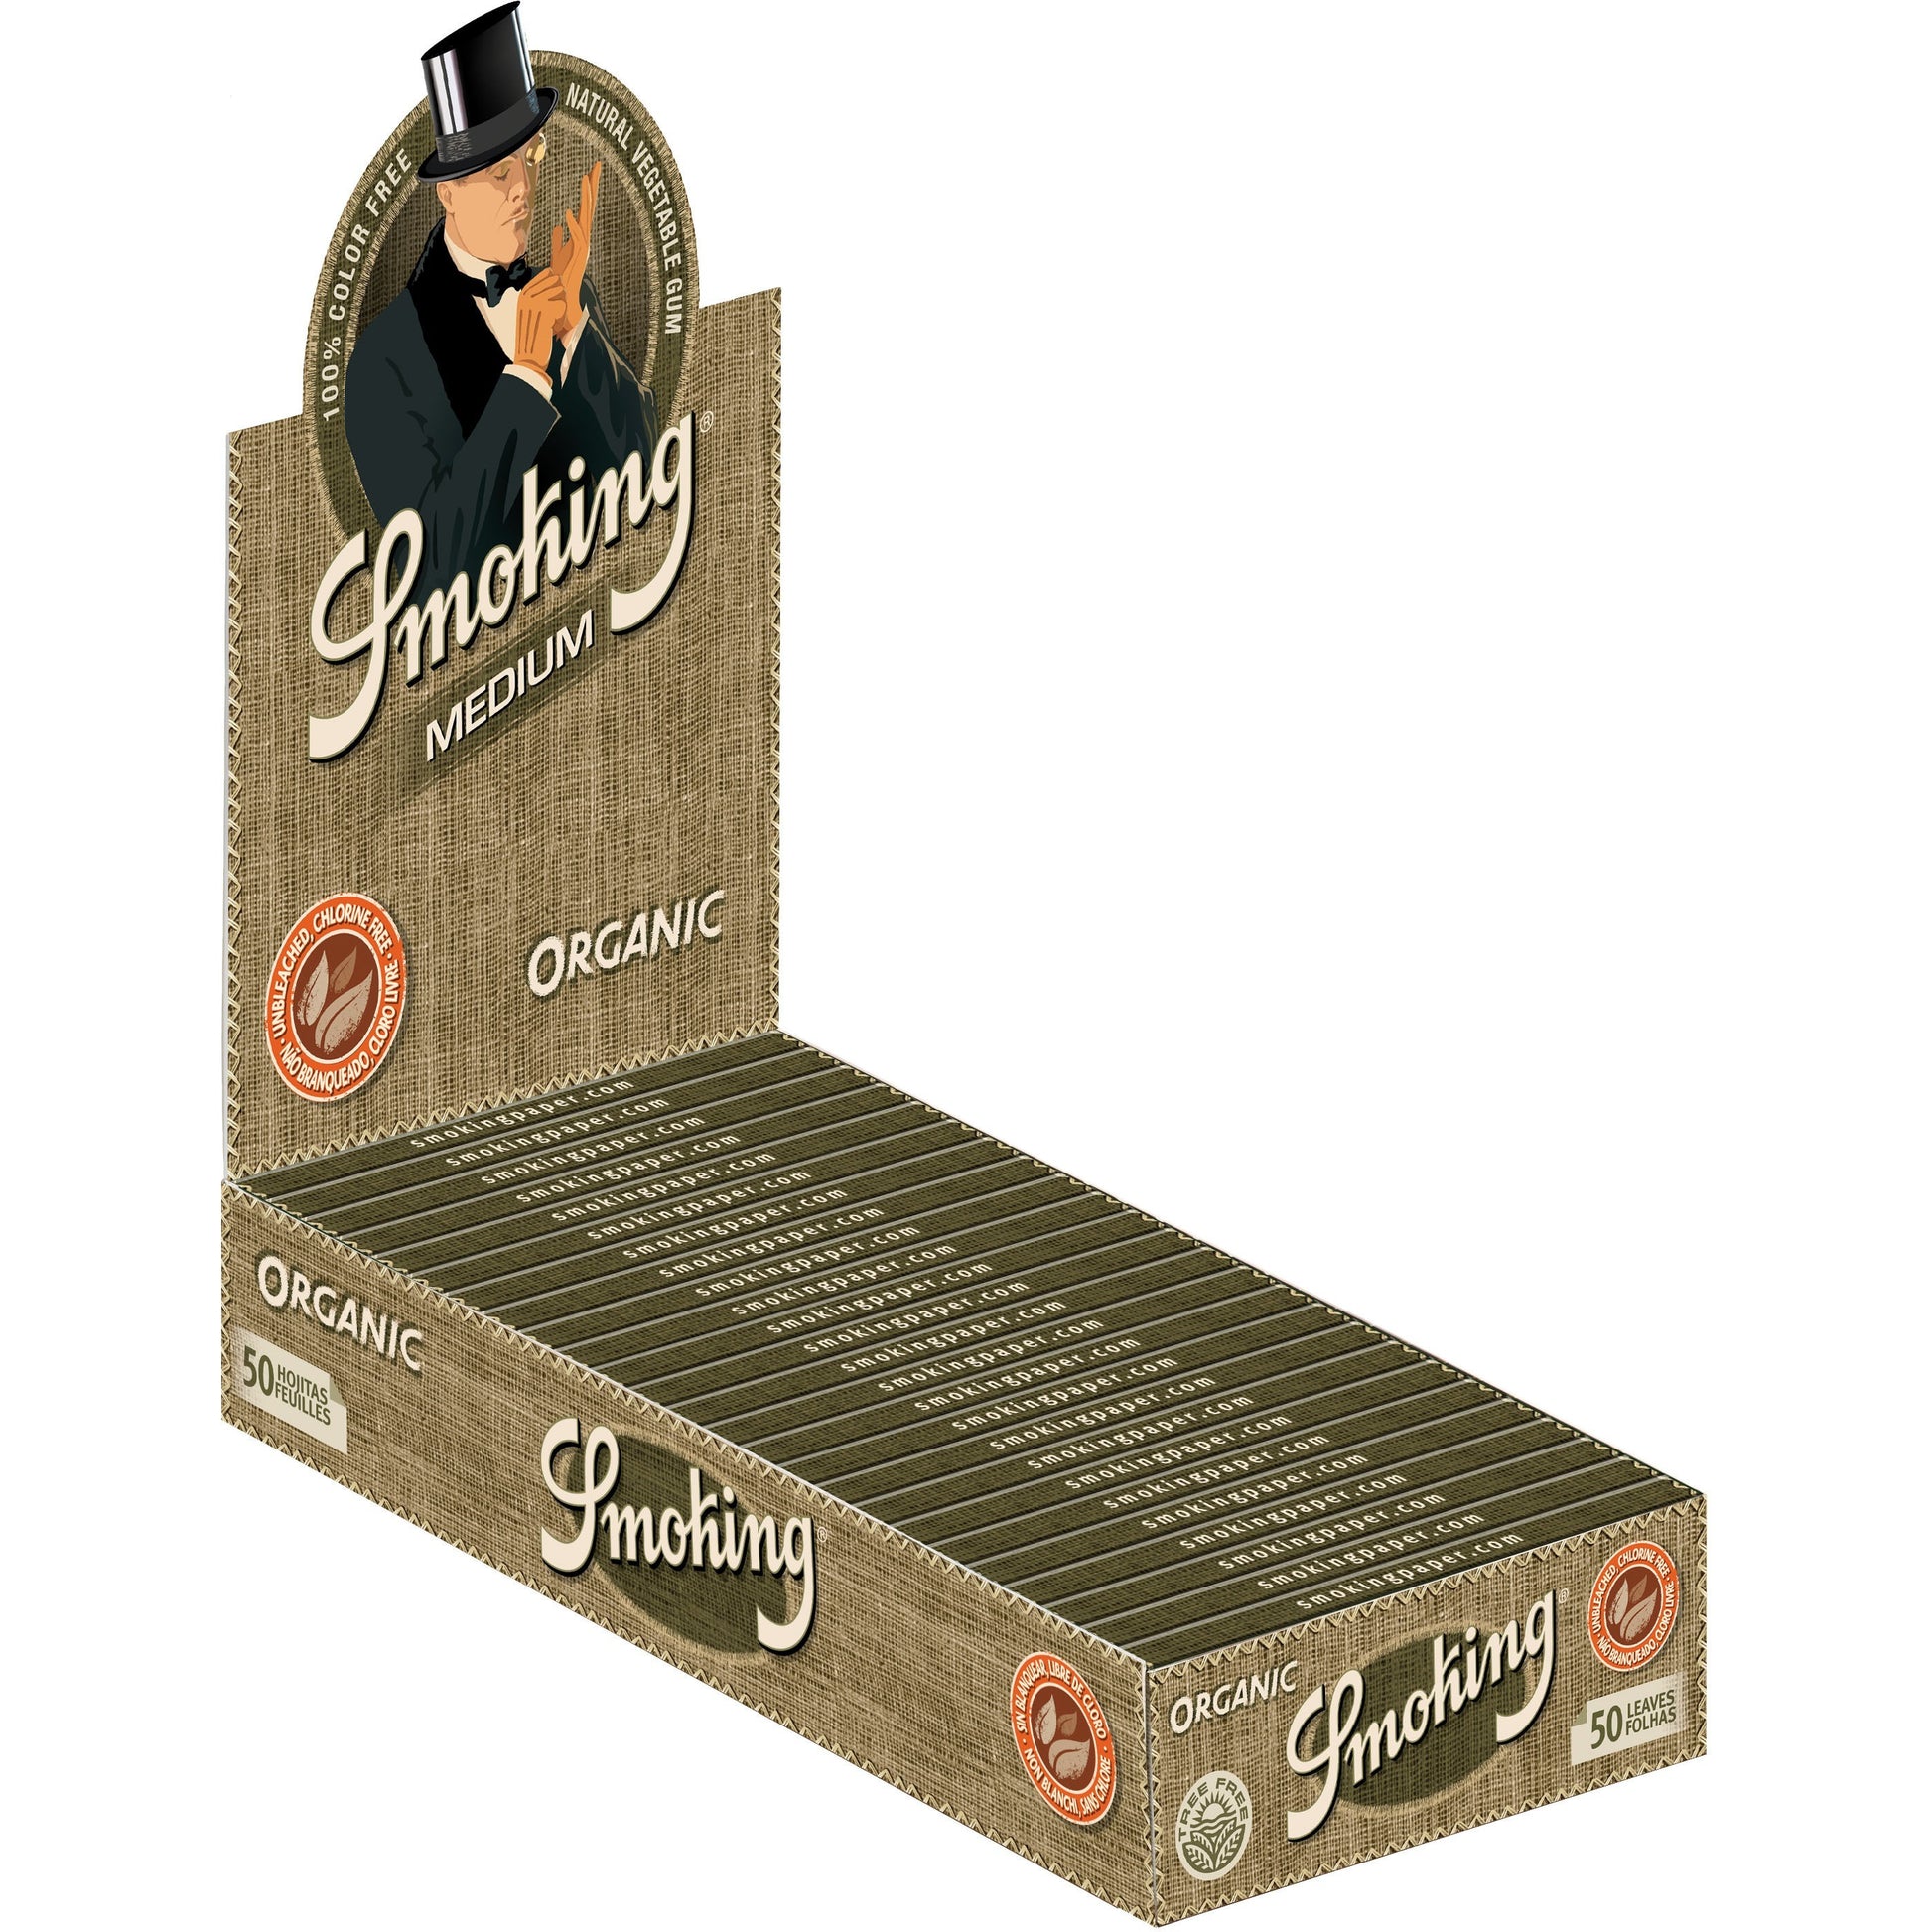 The Expert Smoker's Guide to the Top Rolling Paper Brands